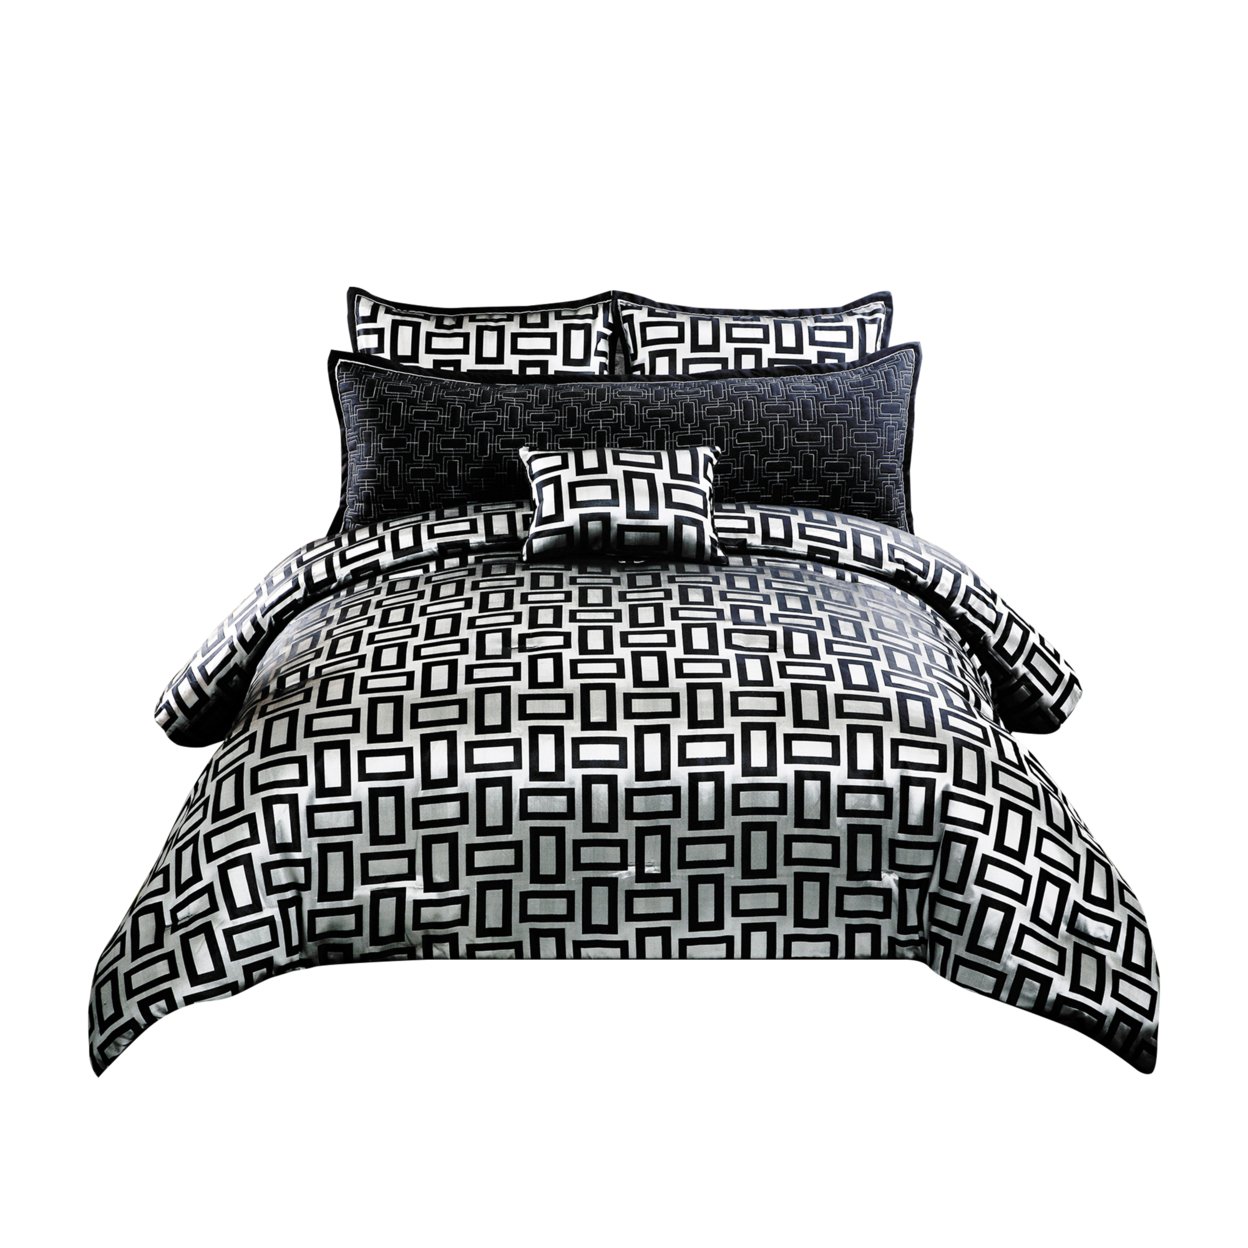 6 Piece Polyester Queen Comforter Set With Geometric Print, Gray And Black- Saltoro Sherpi